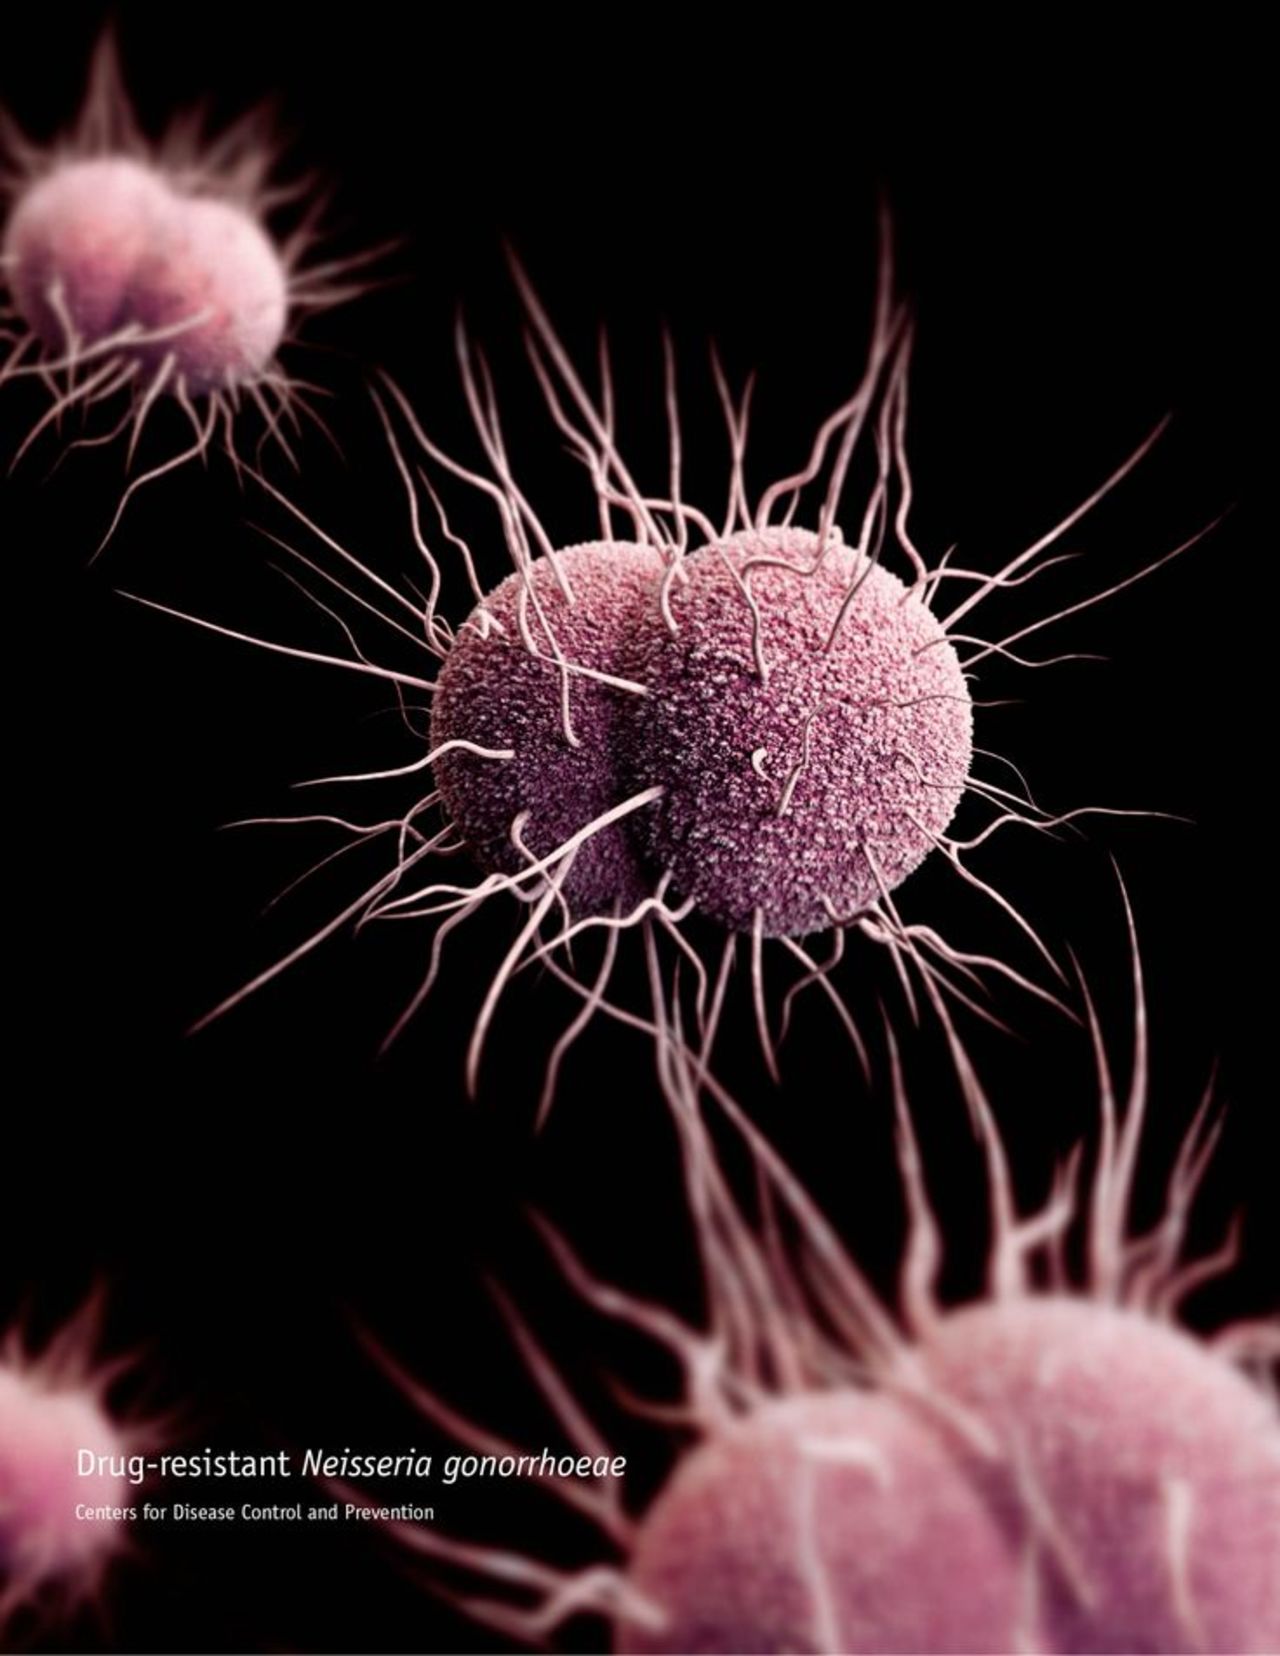 Neisseria gonorrhoeae, the bacteria that cause gonorrhea, are developing resistance to the main drugs used against them. Left untreated, gonorrhea can cause serious health problems, including pelvic inflammatory disease in women and a painful condition in the tubes attached to the testicles in men.